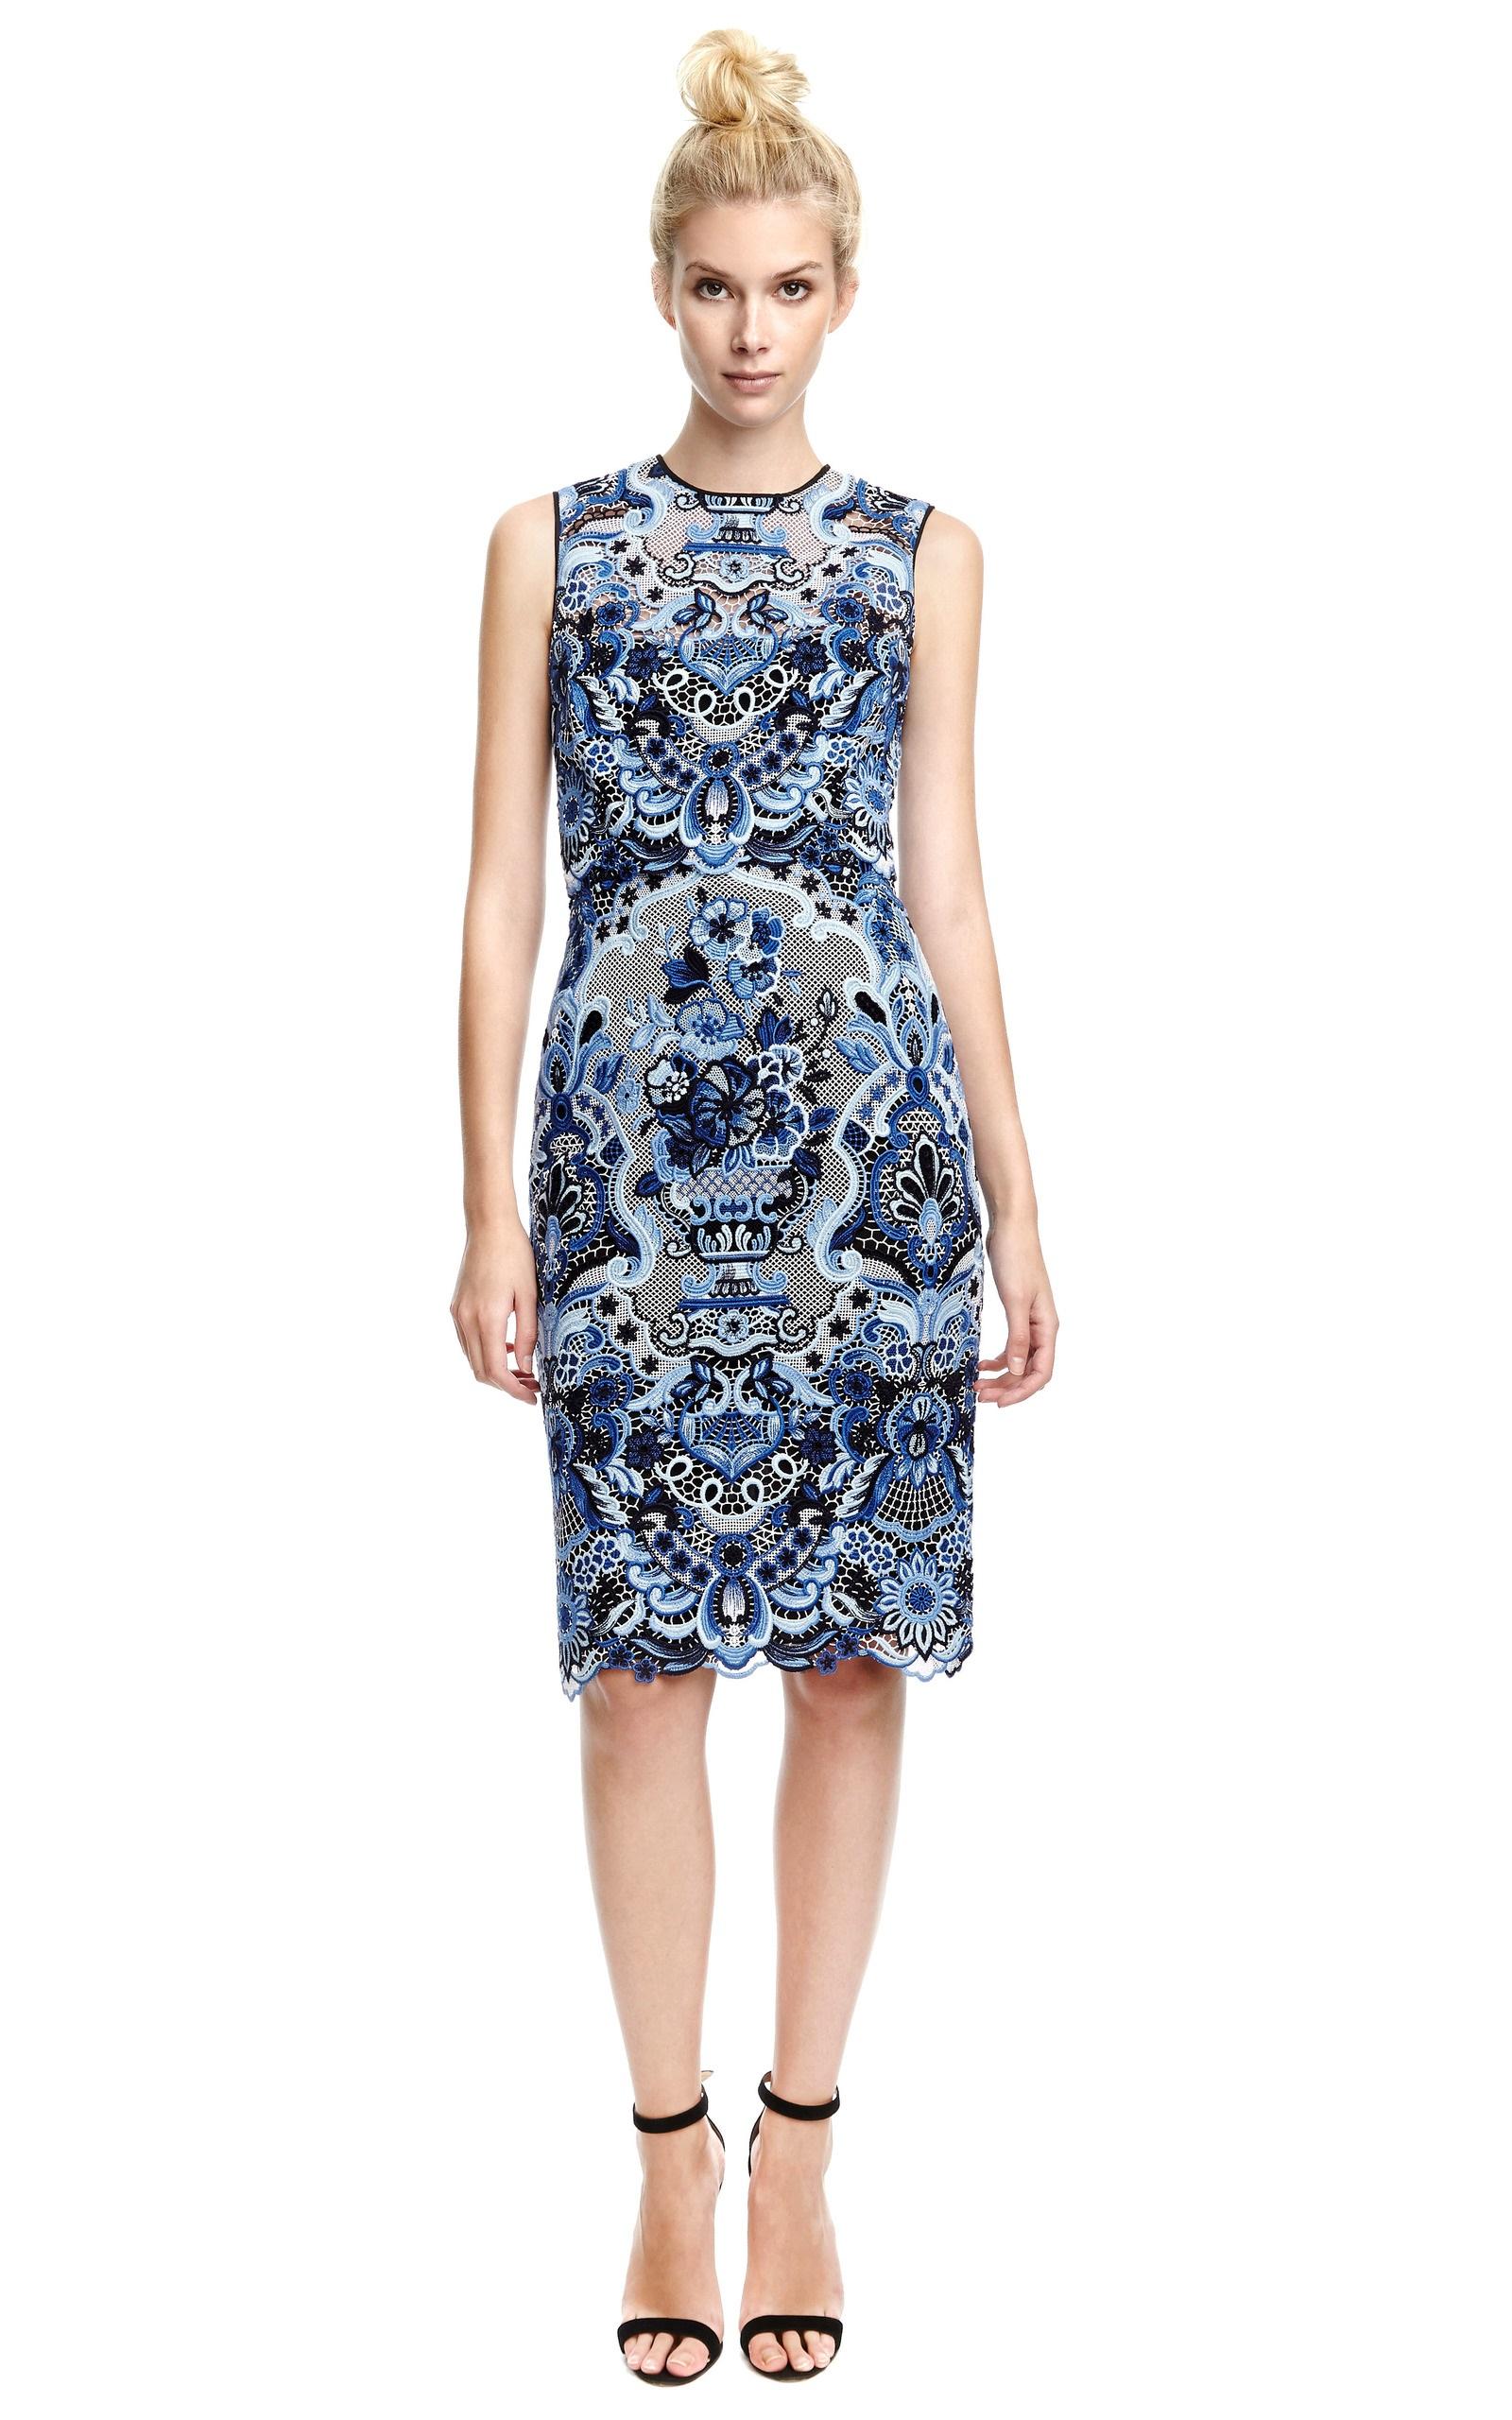 Valentino Iconic Blue and White Floral Guipure Lace Midi Dress
Designer size - 4
*Pure Porcelain* F/W 2013 Collection
The dress motif was Delftware Porcelain in Netherlands inspired.
Exquisite Floral Pattern Created from Several Blue Tones on a